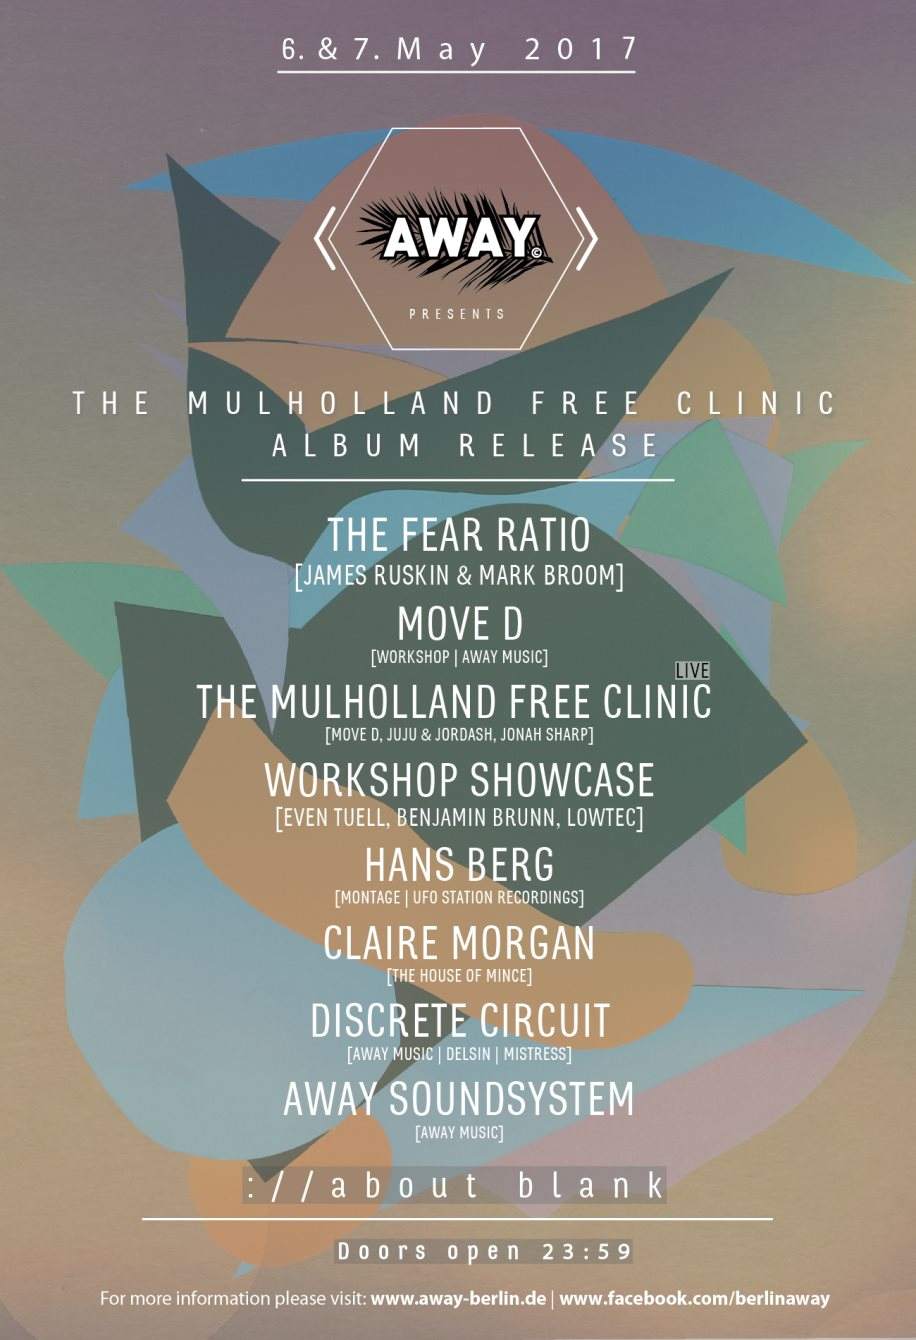 Away presents The Mulholland Free Clinic Album Release - フライヤー裏